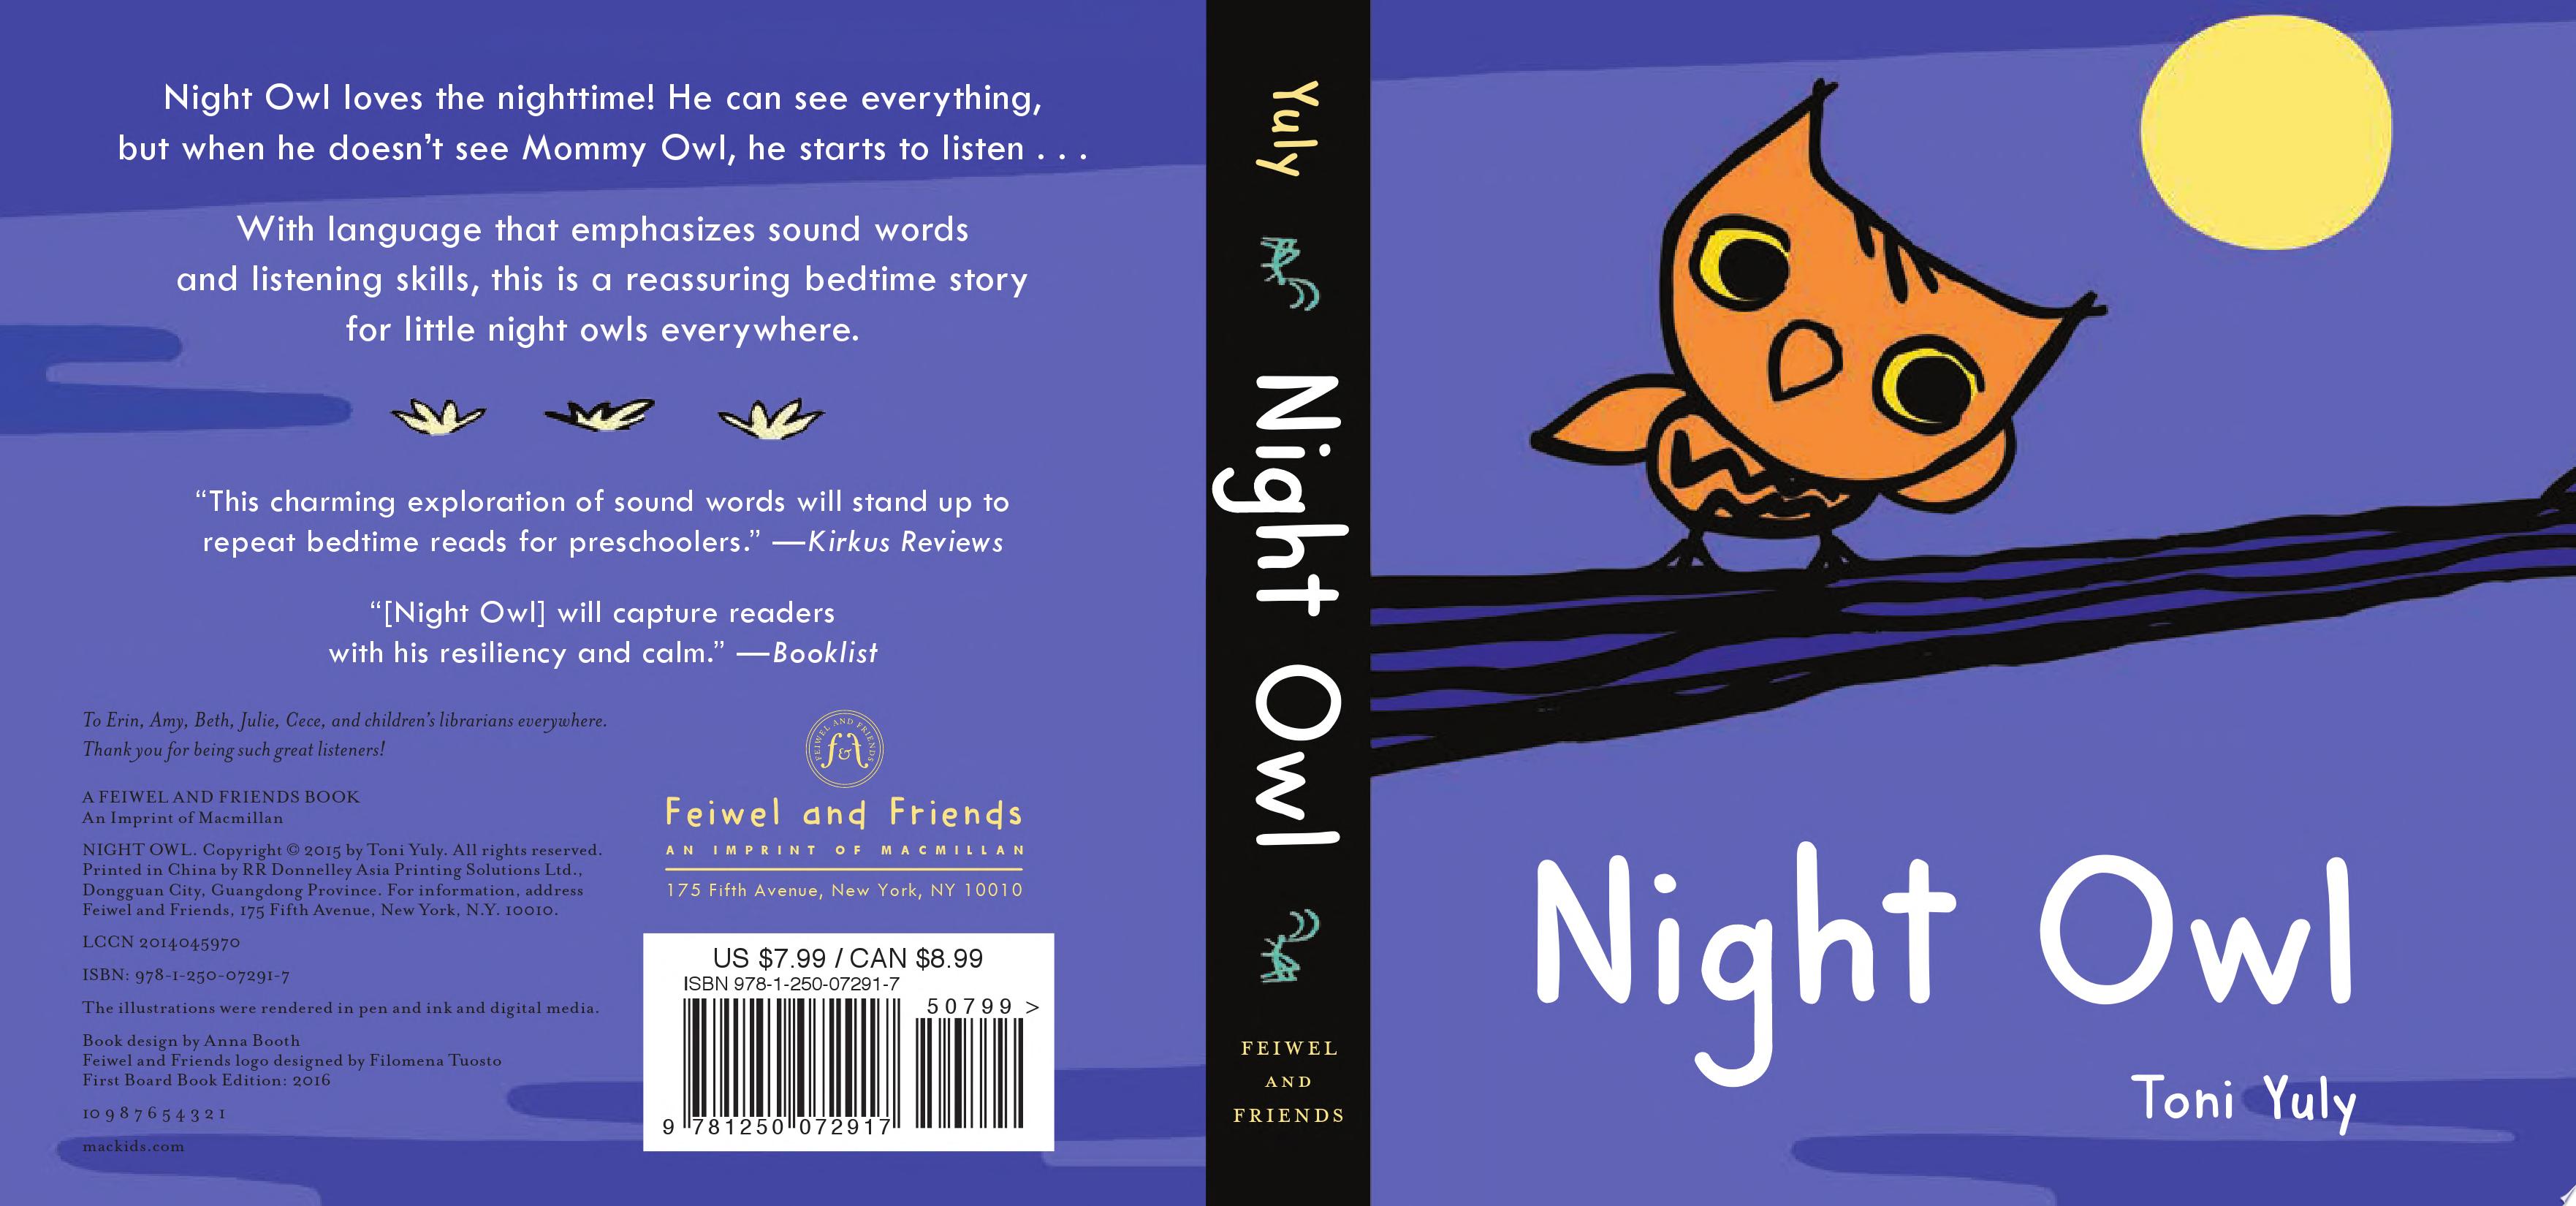 Image for "Night Owl"